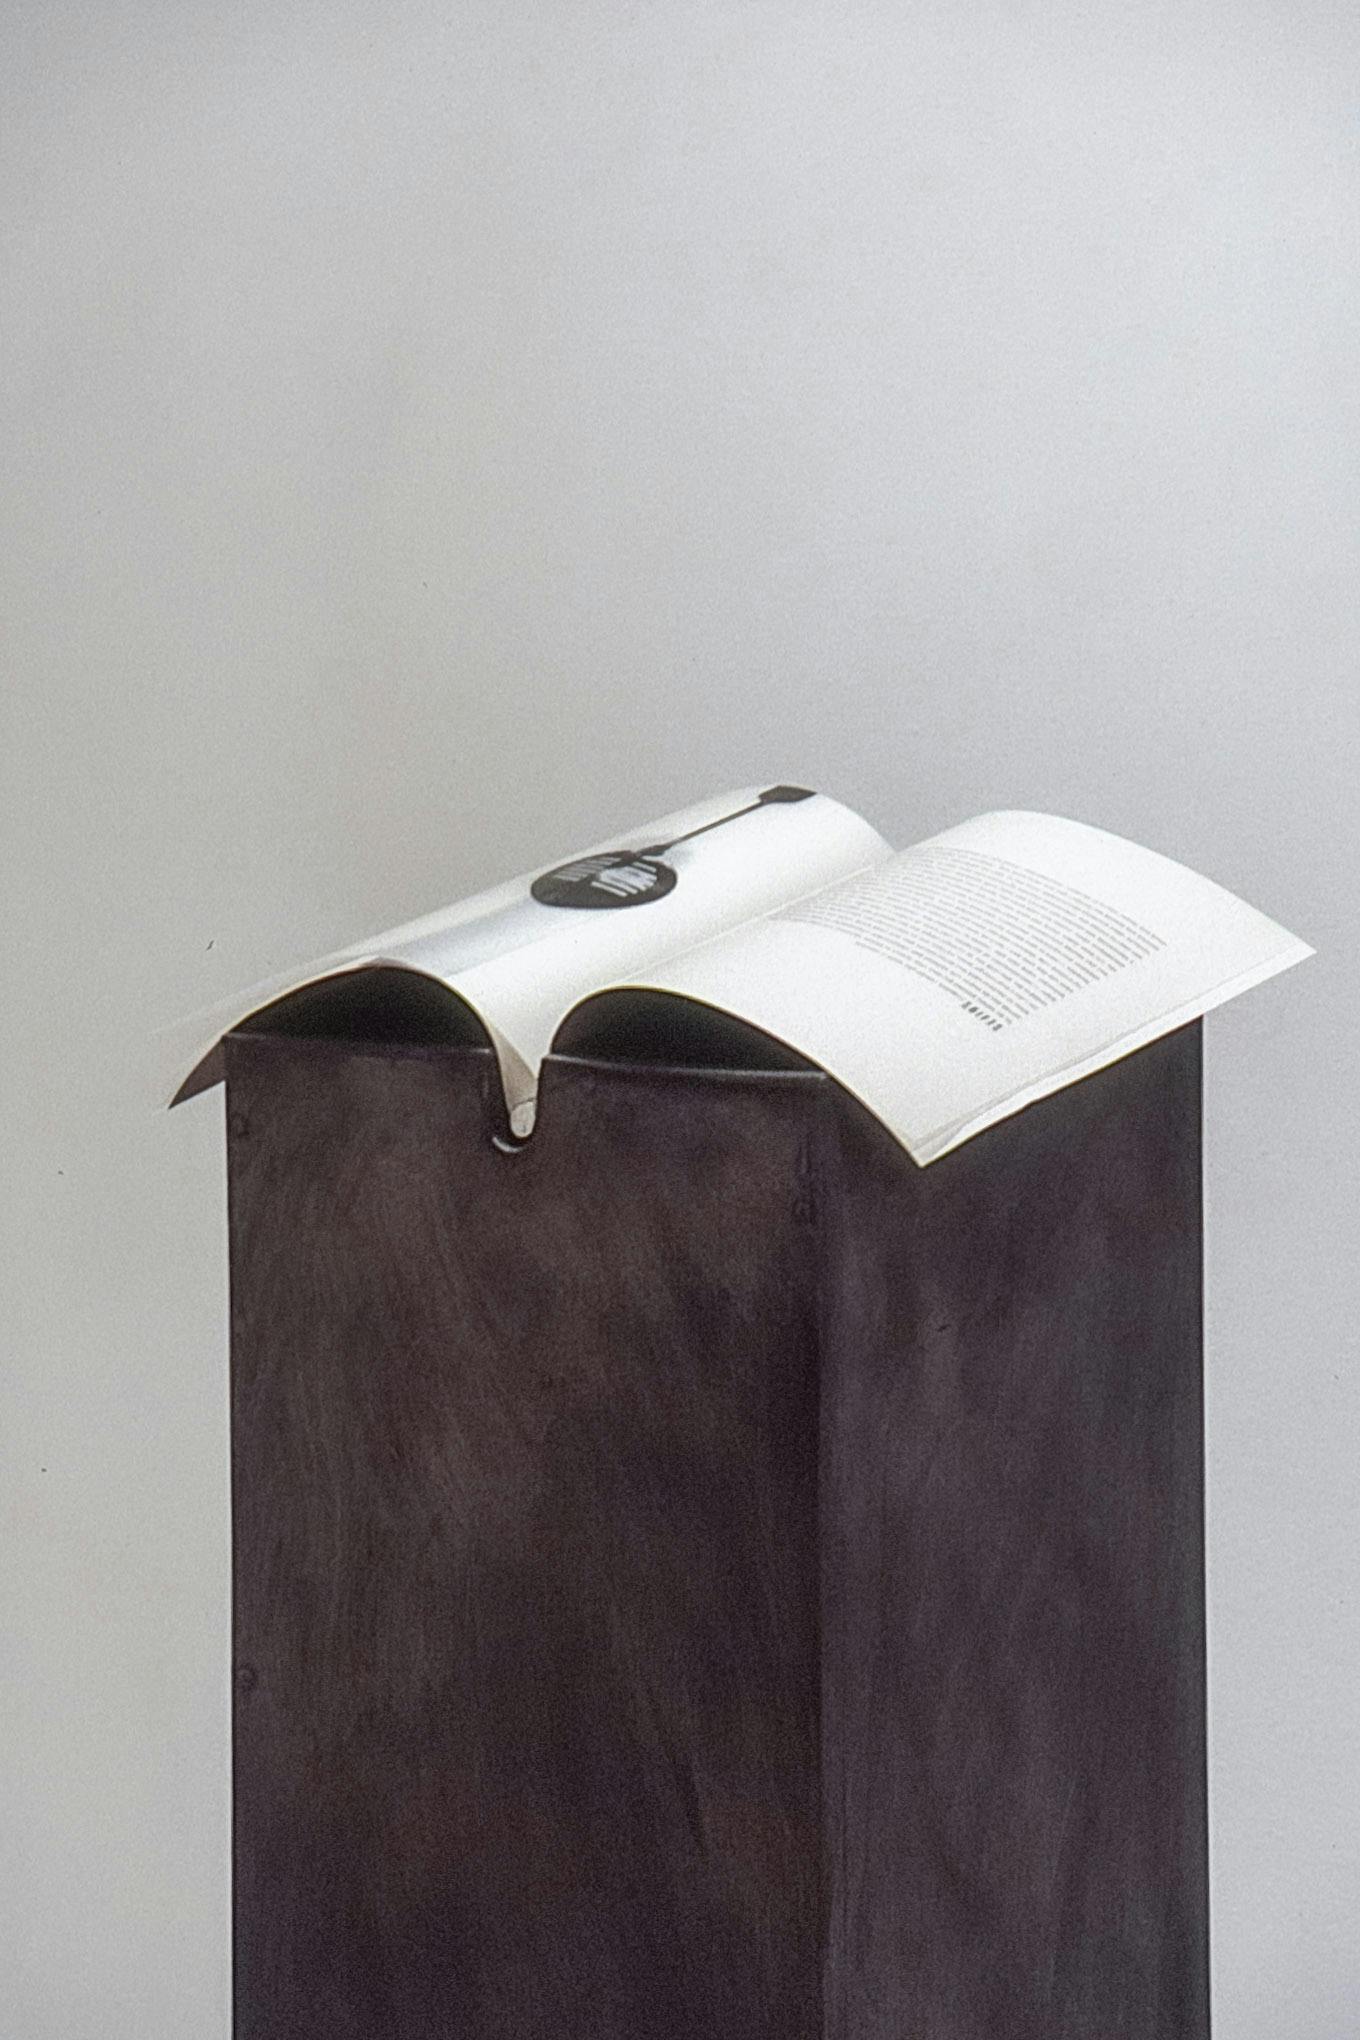 A thin, open book rests on the opening of a dark, brushed metal plinth. The plinth appears to be hollow and has a small divot to hold the spine of the book. The background shows a white wall.